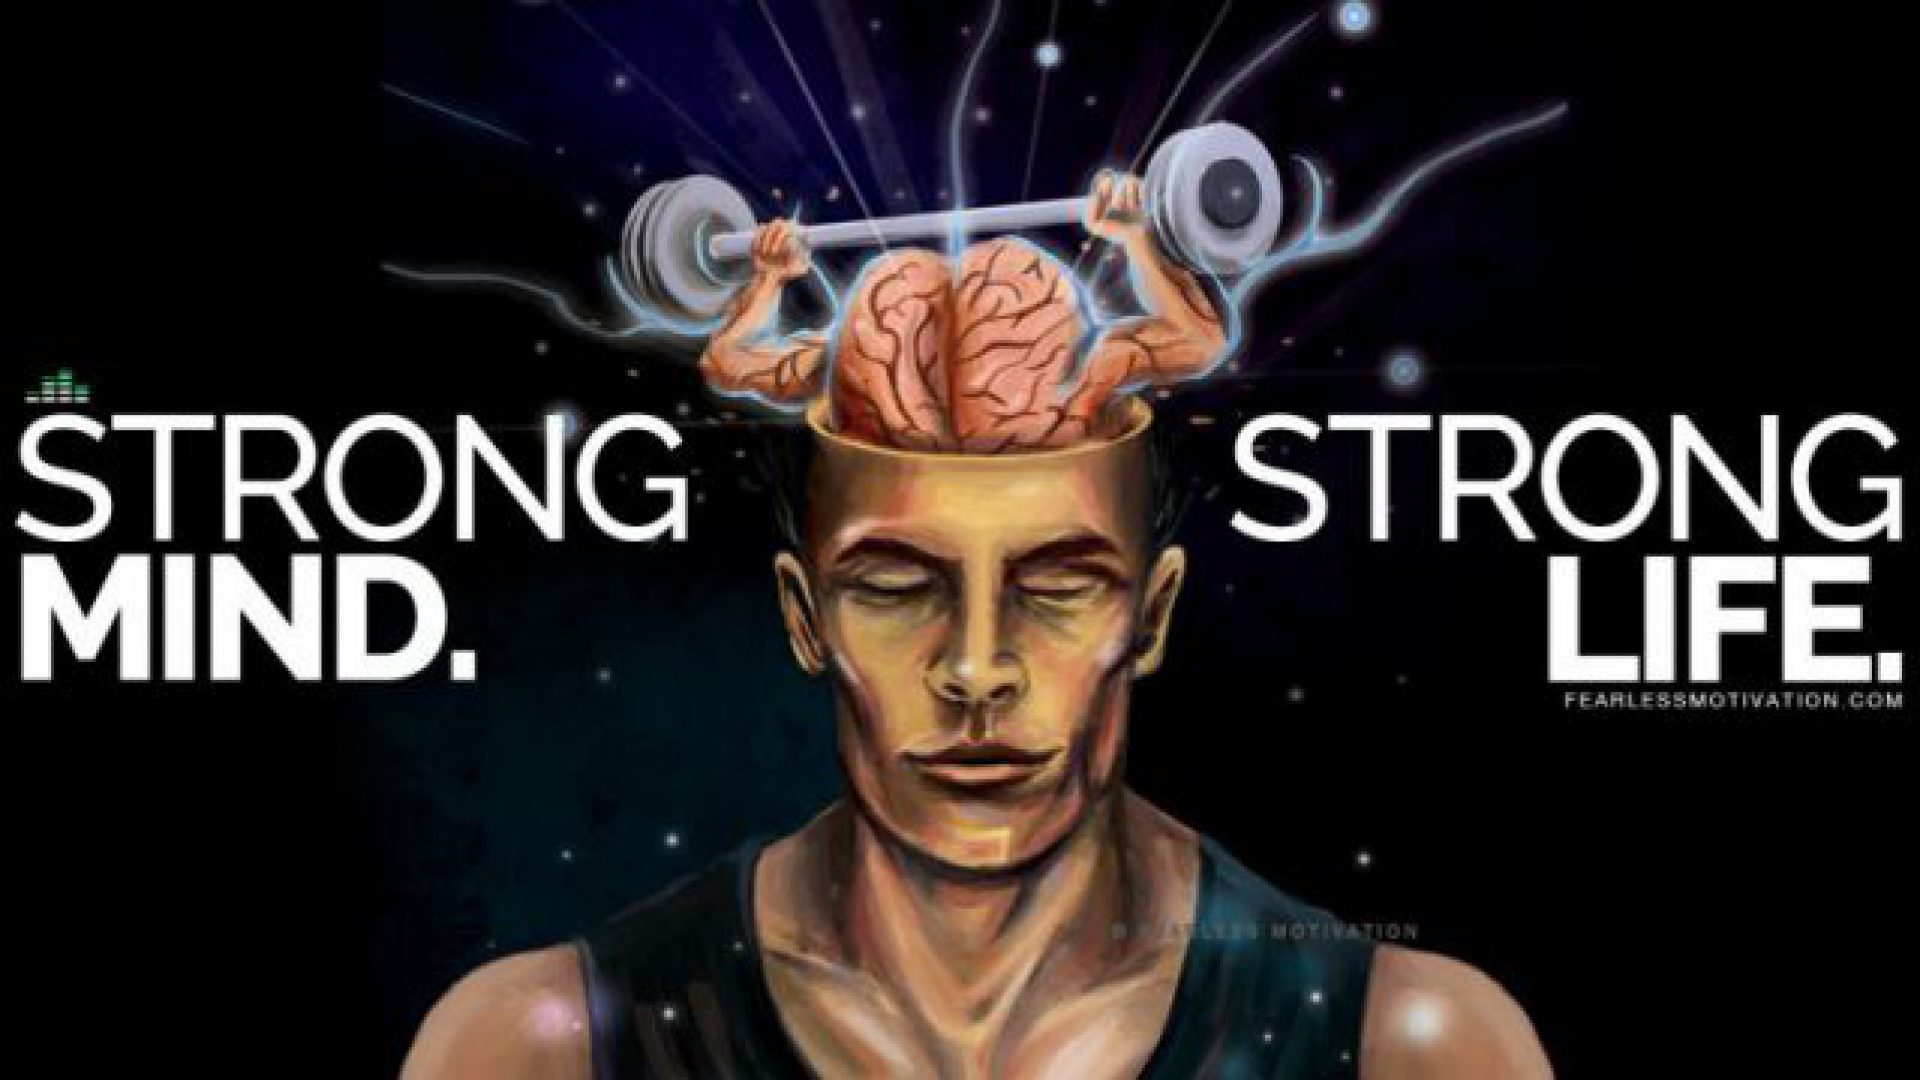 YOU CAN HAVE A STRONG MIND